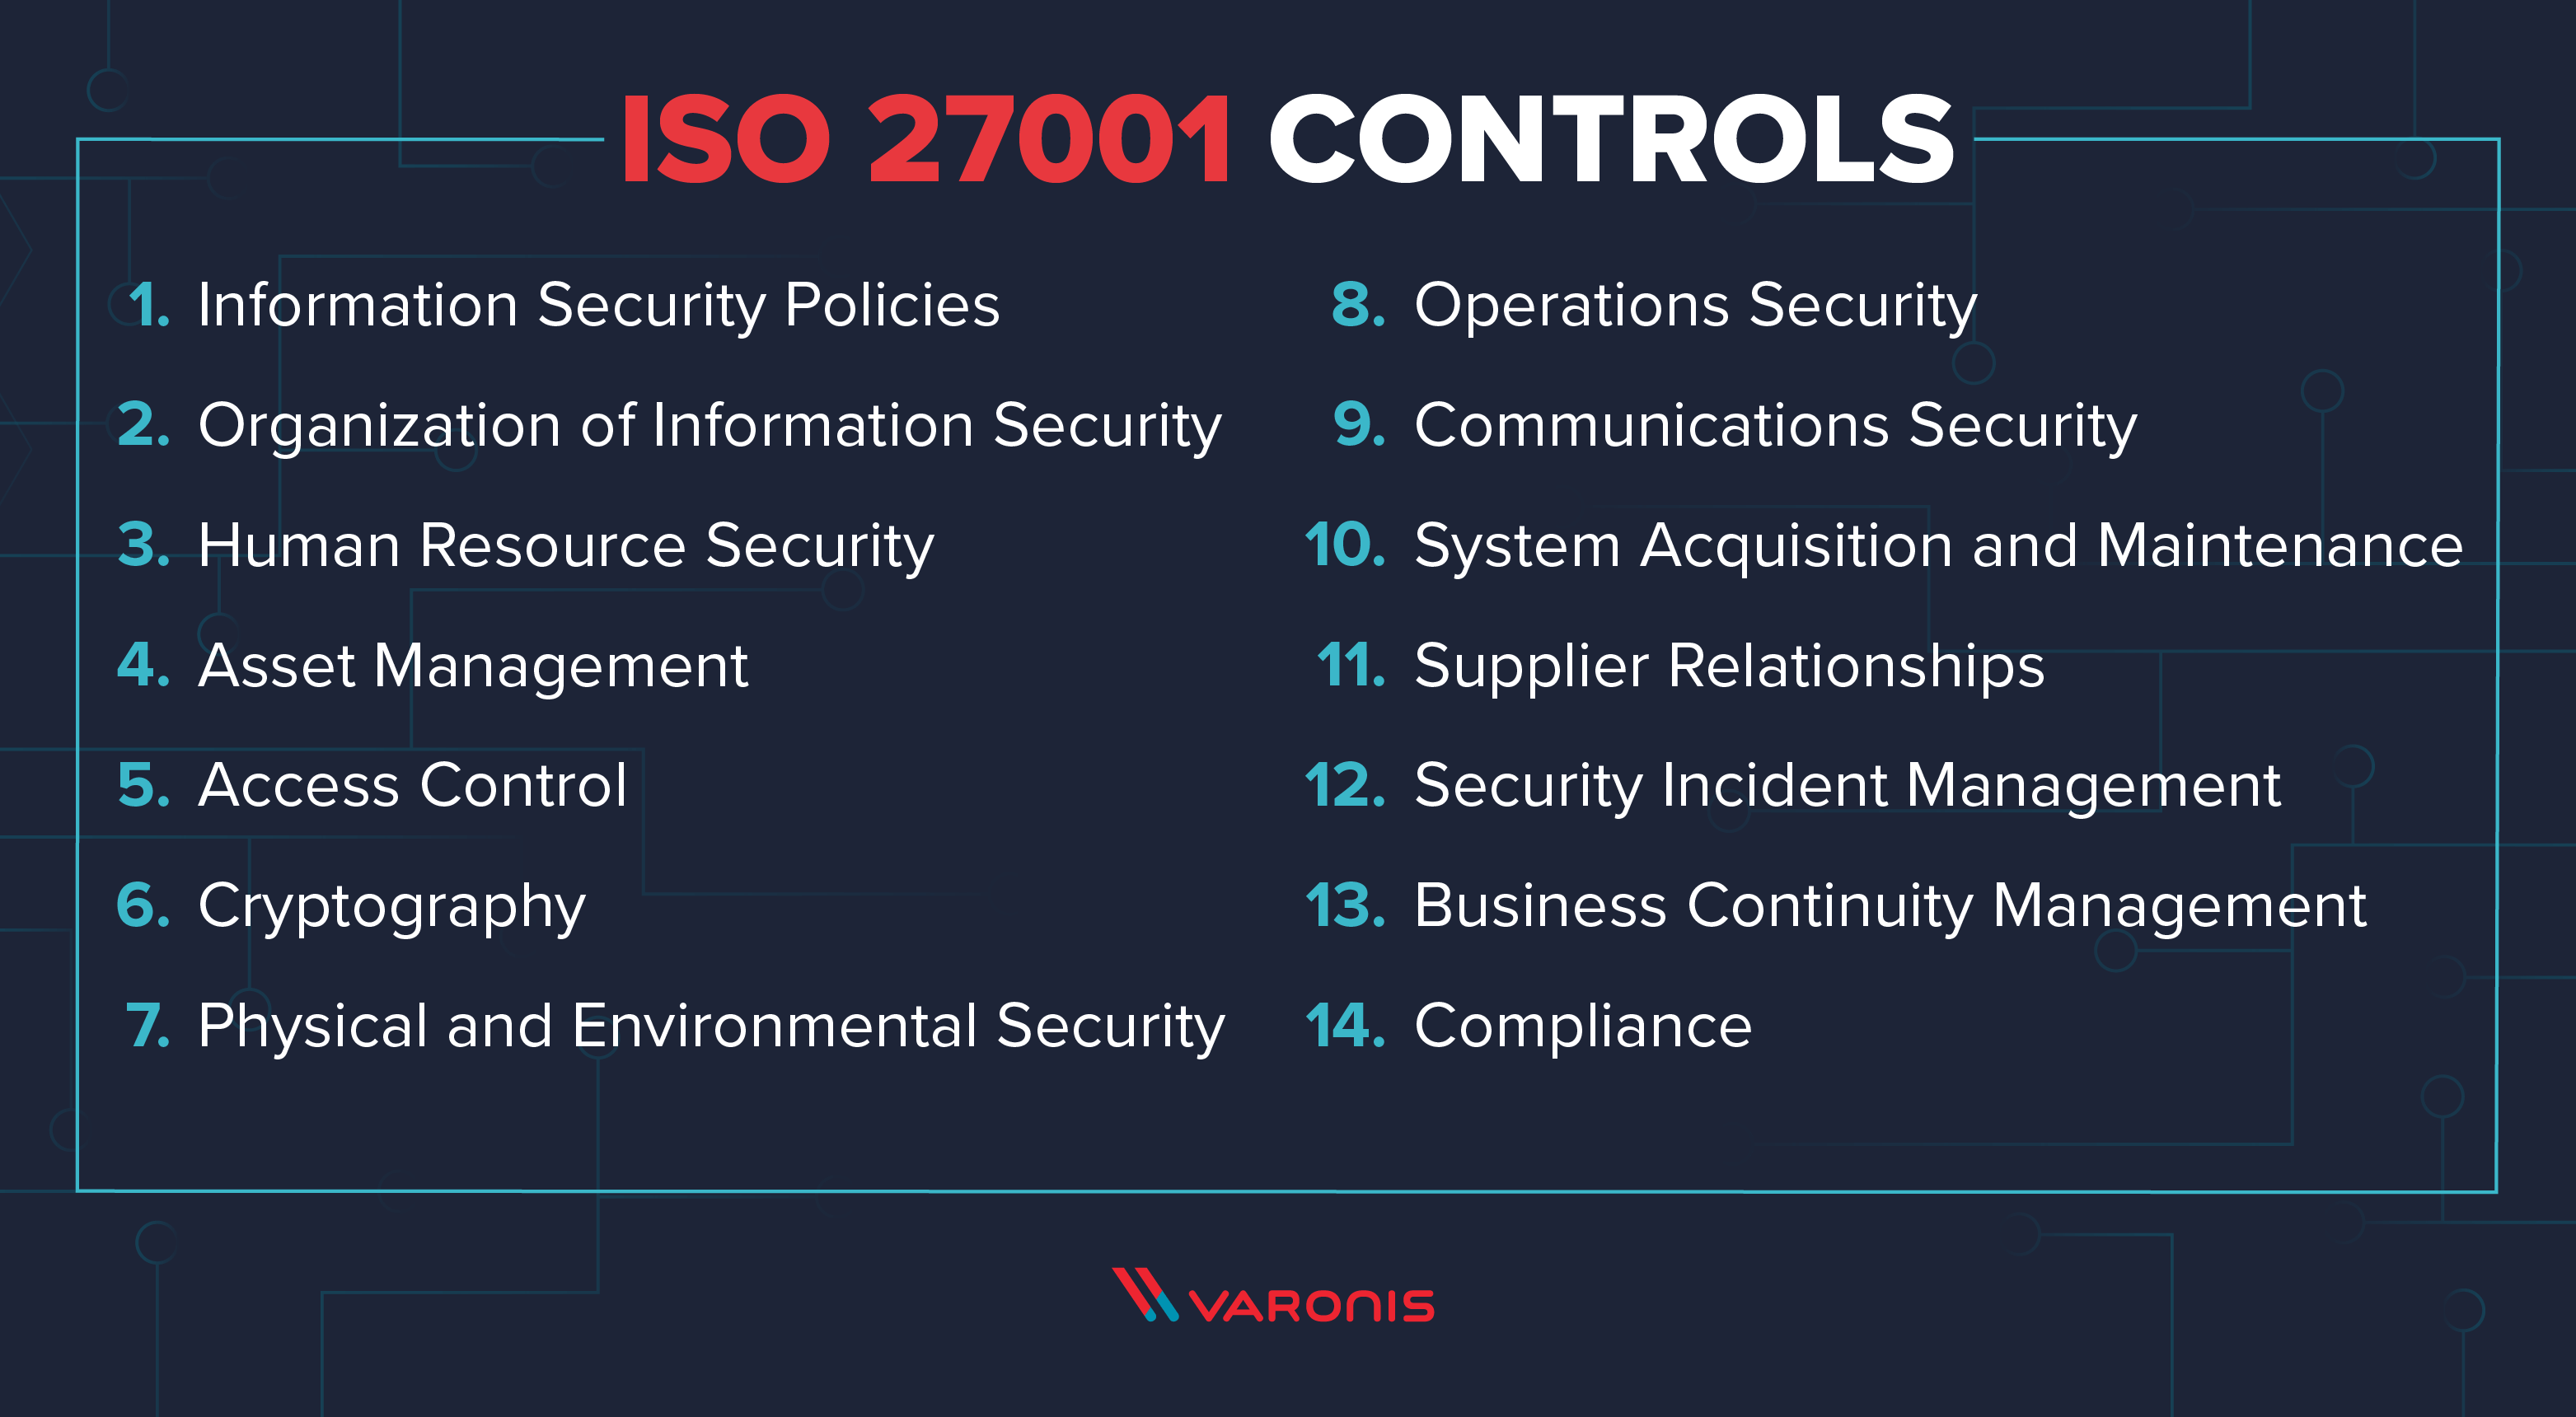 image of the ISO 27001 controls